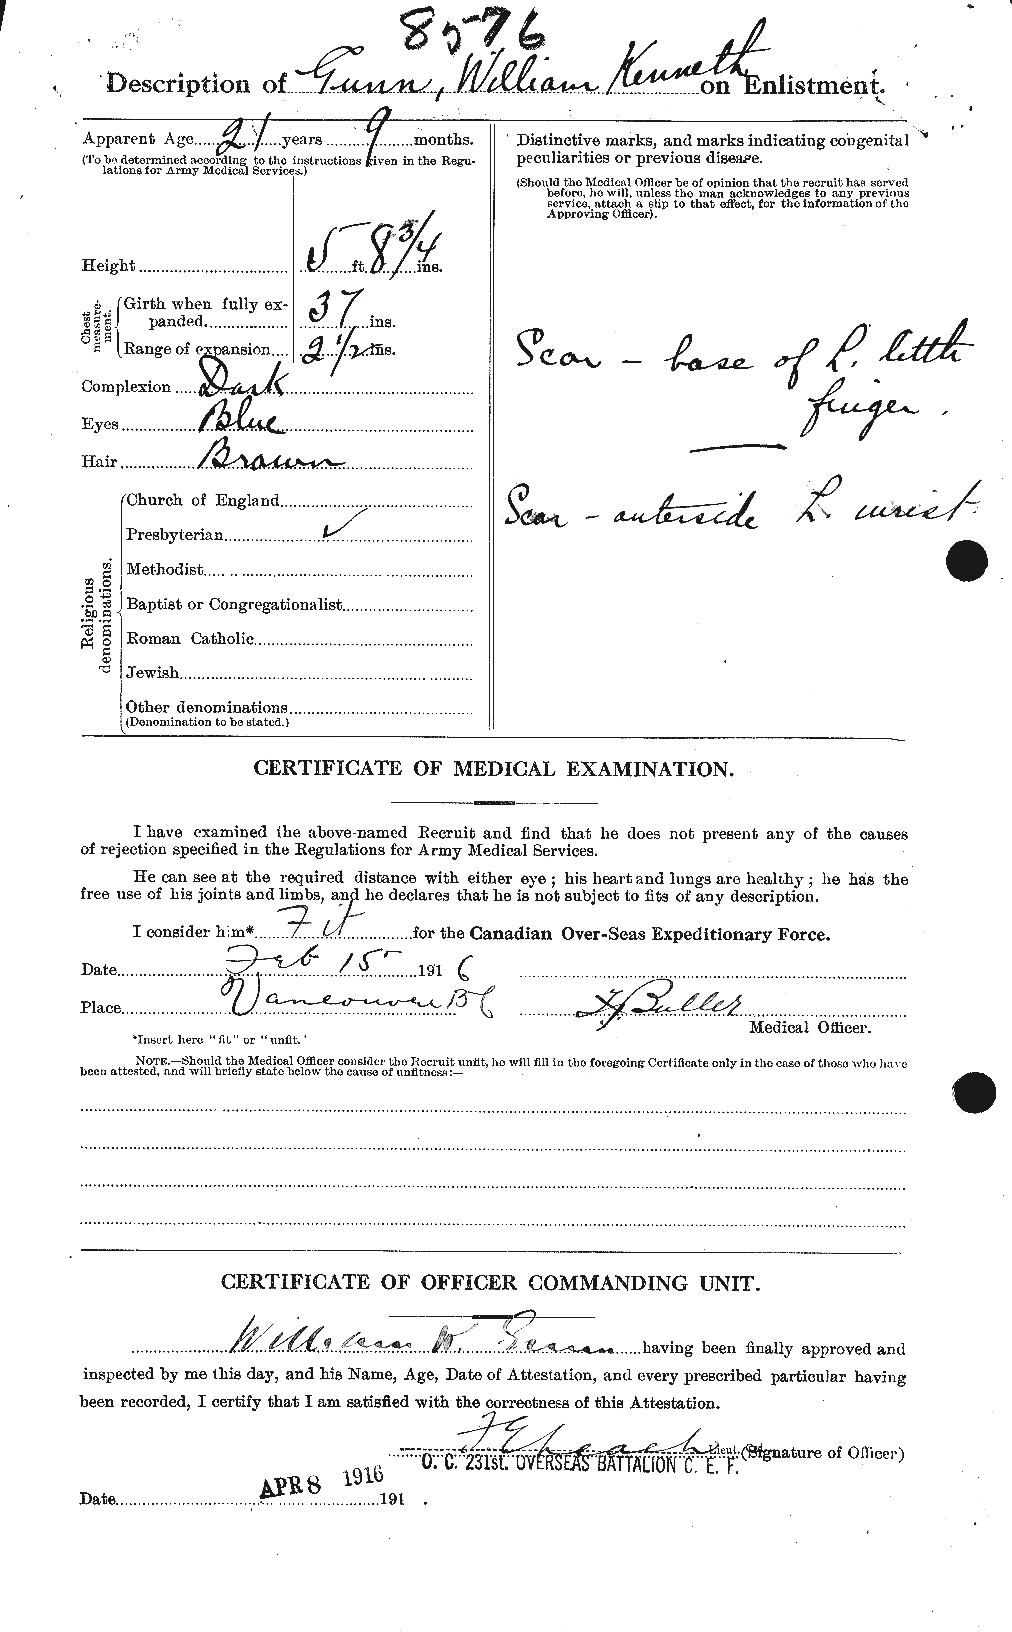 Personnel Records of the First World War - CEF 369372b